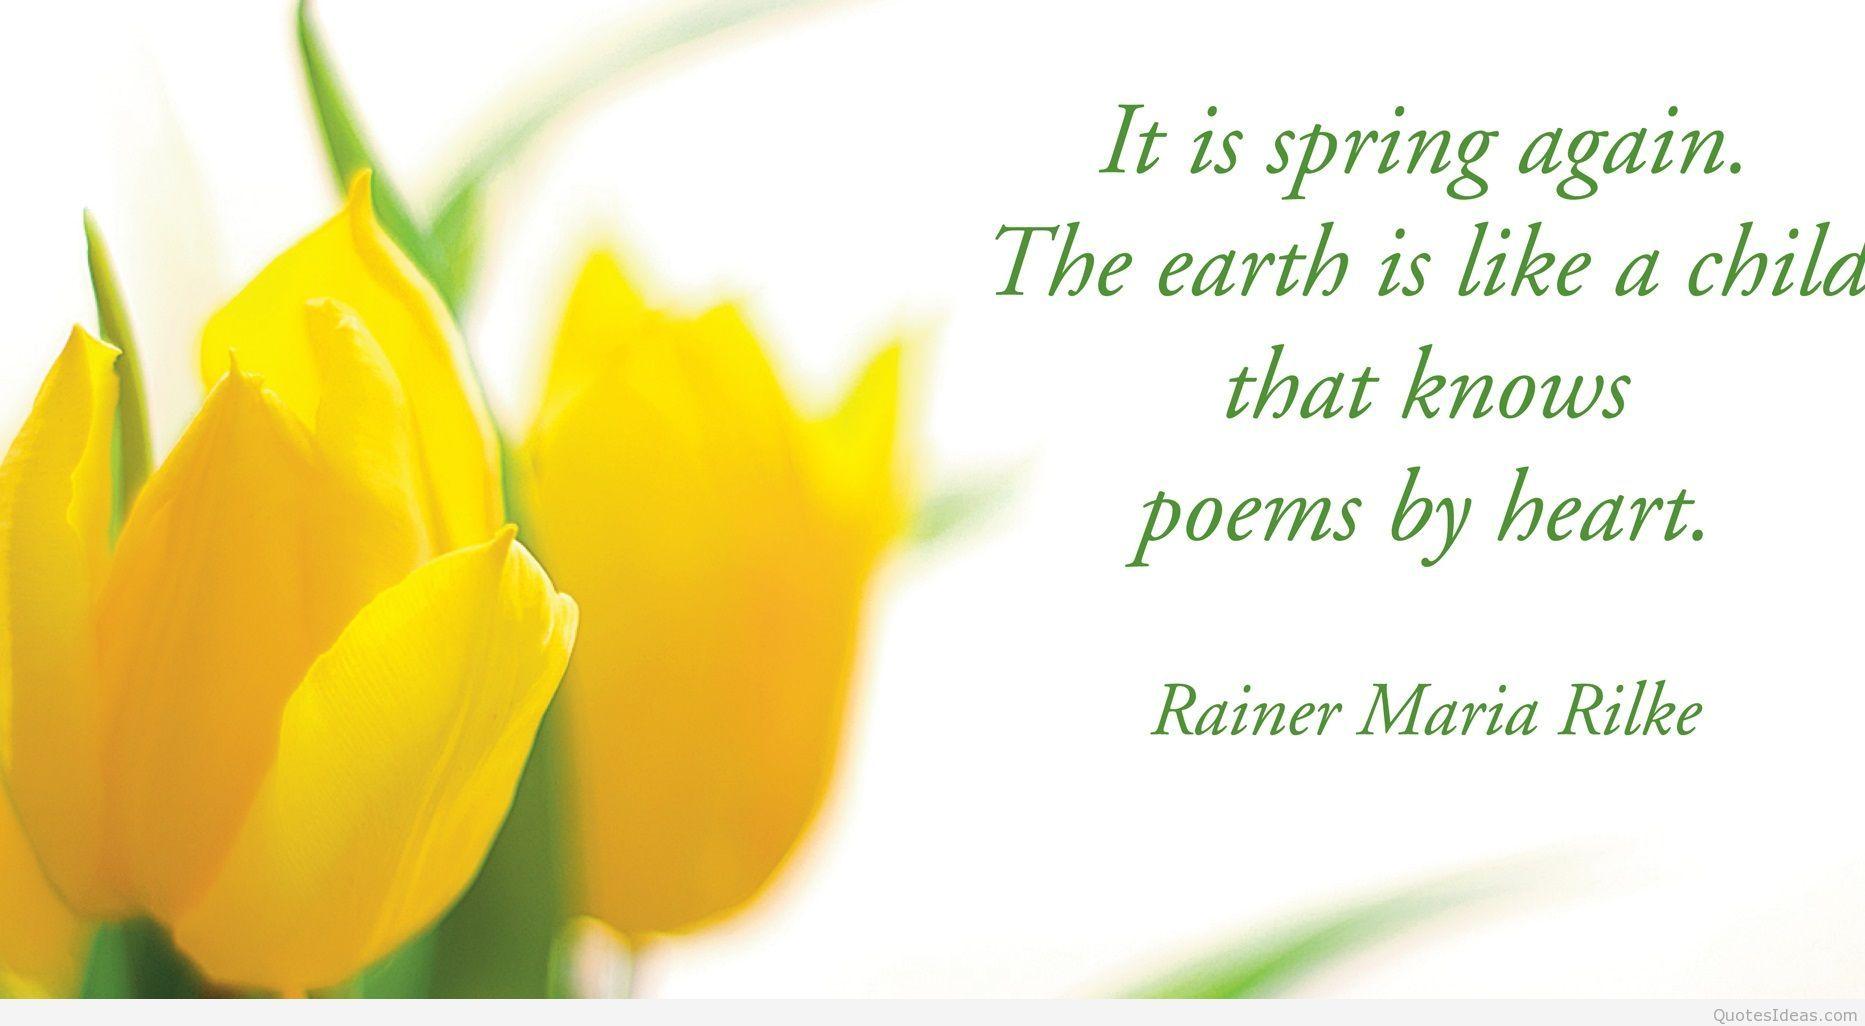 Spring quotes image & spring wallpaper quotes